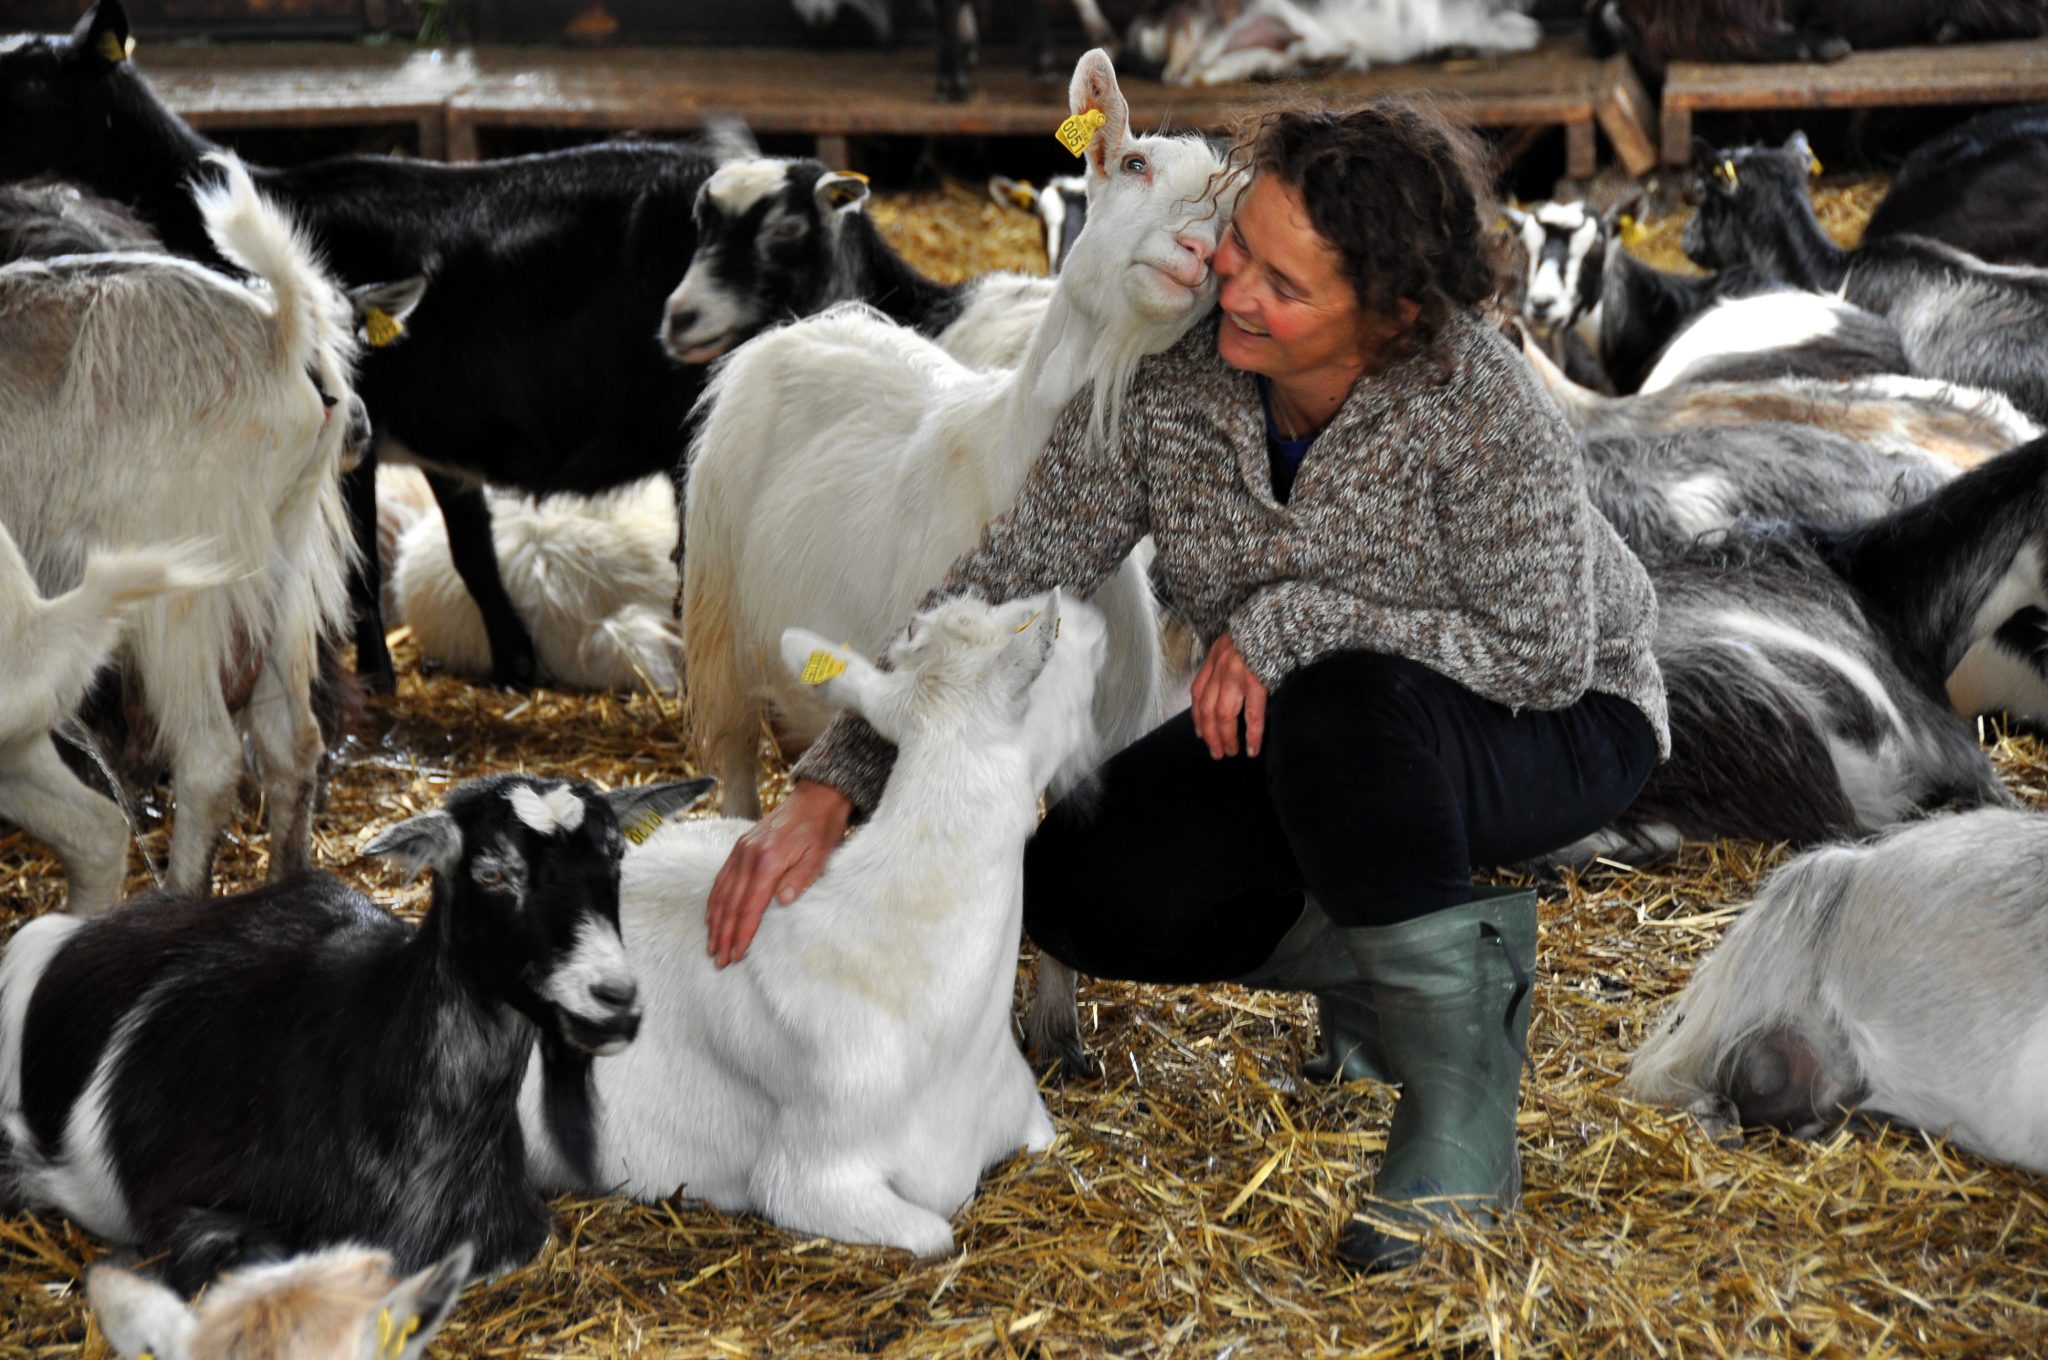 Marielle de Roos with the goats. The goats come willingly to be milked and live mainly in the hillsides around the farm © Lofoten gårdsysteri